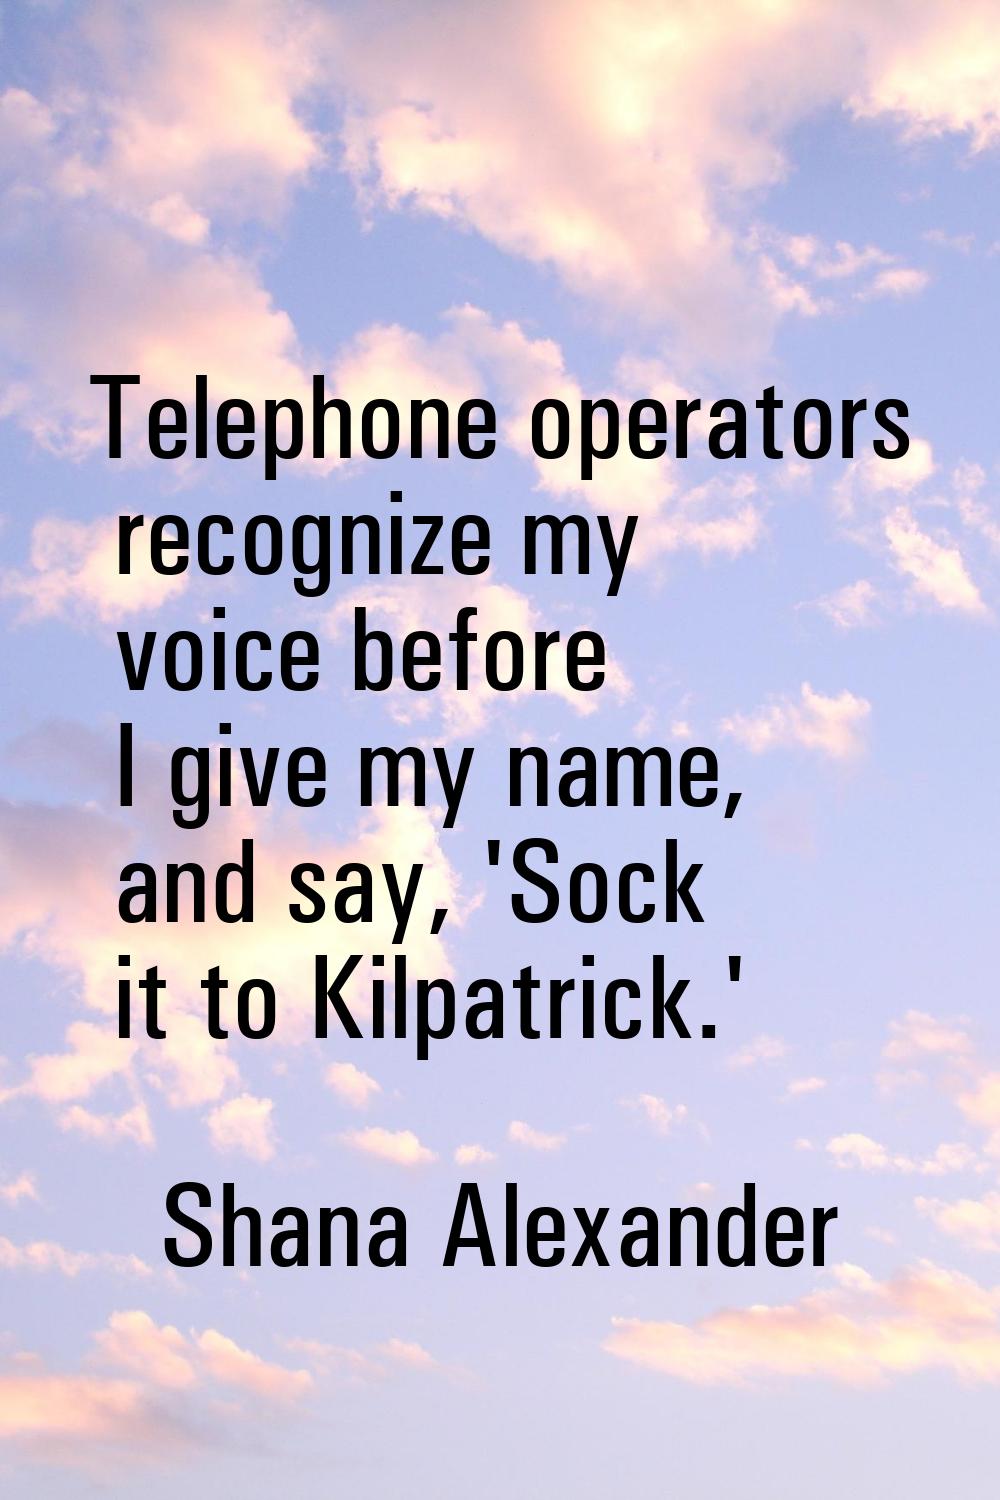 Telephone operators recognize my voice before I give my name, and say, 'Sock it to Kilpatrick.'